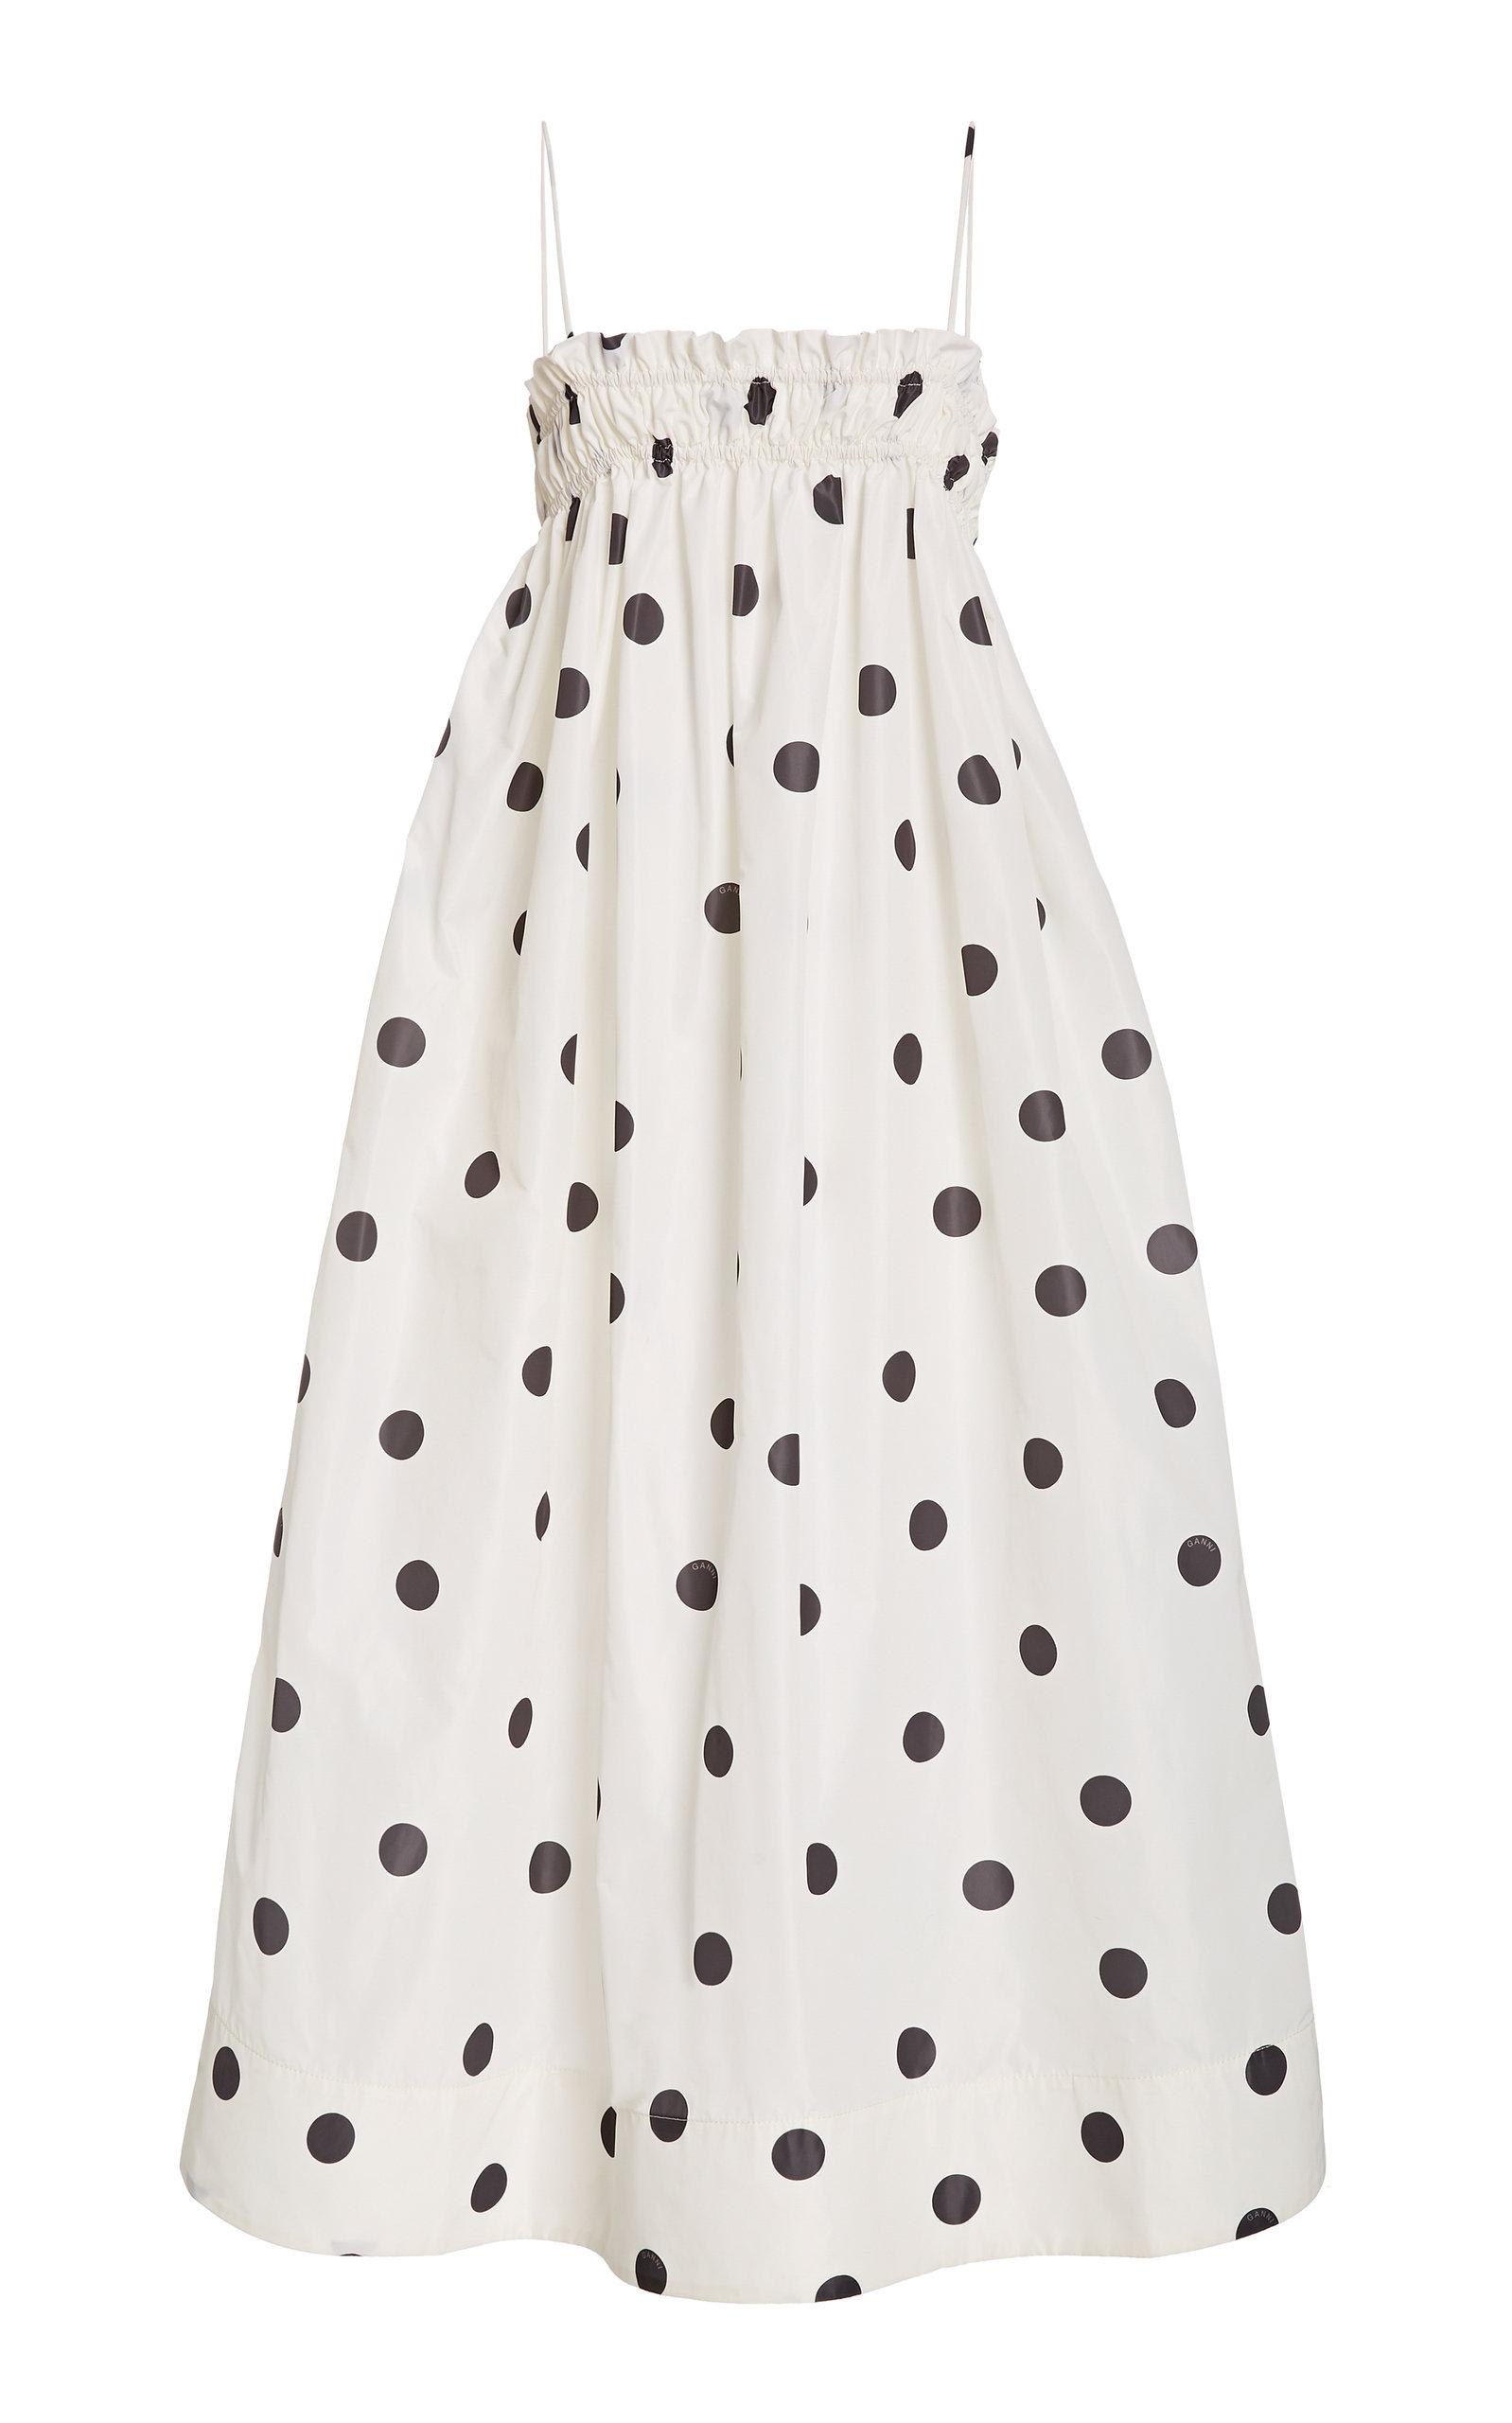 Ganni Synthetic Polka-dot Recycled Crepe Midi Dress in White - Lyst